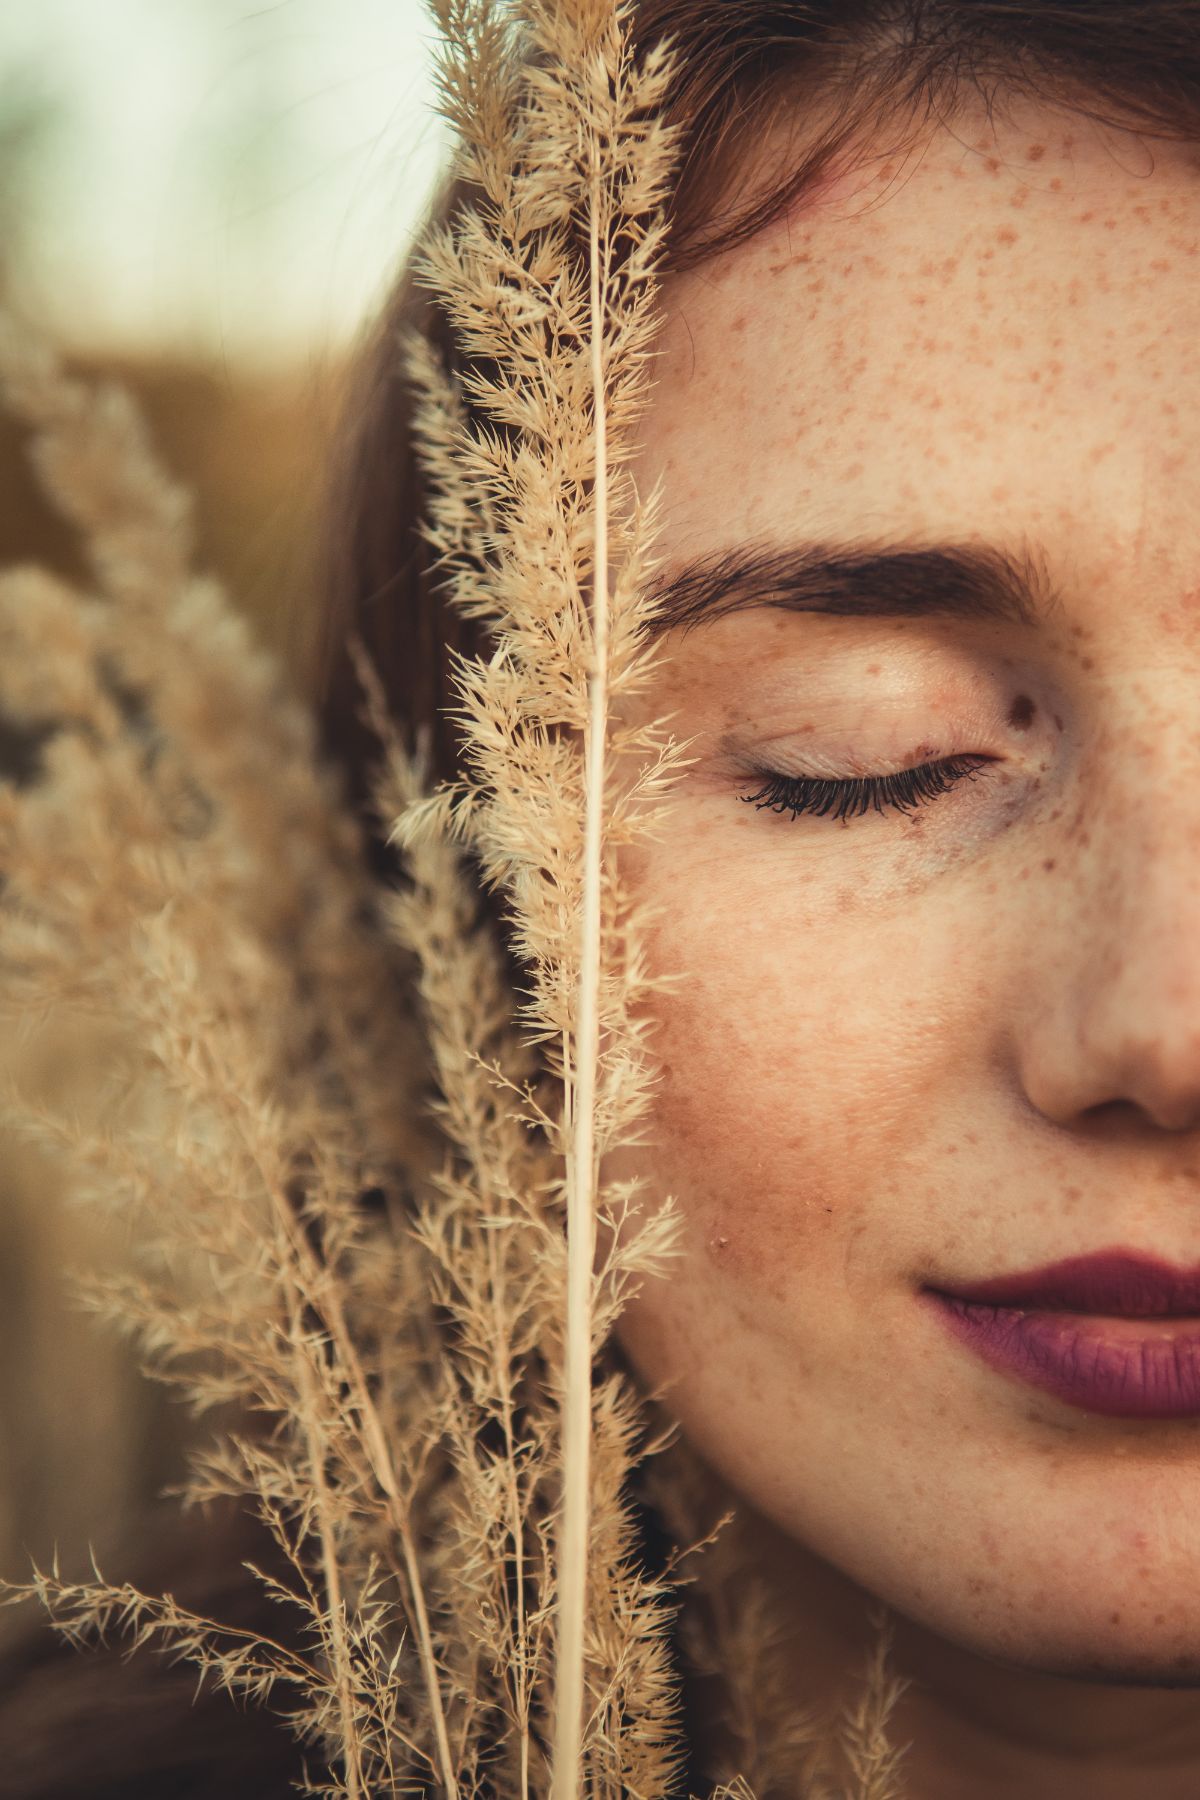 A woman's face touching a plant. With therapy for women in NYC, NY, you can learn how to manage anxiety & stress. Get started with a therapist for women today!